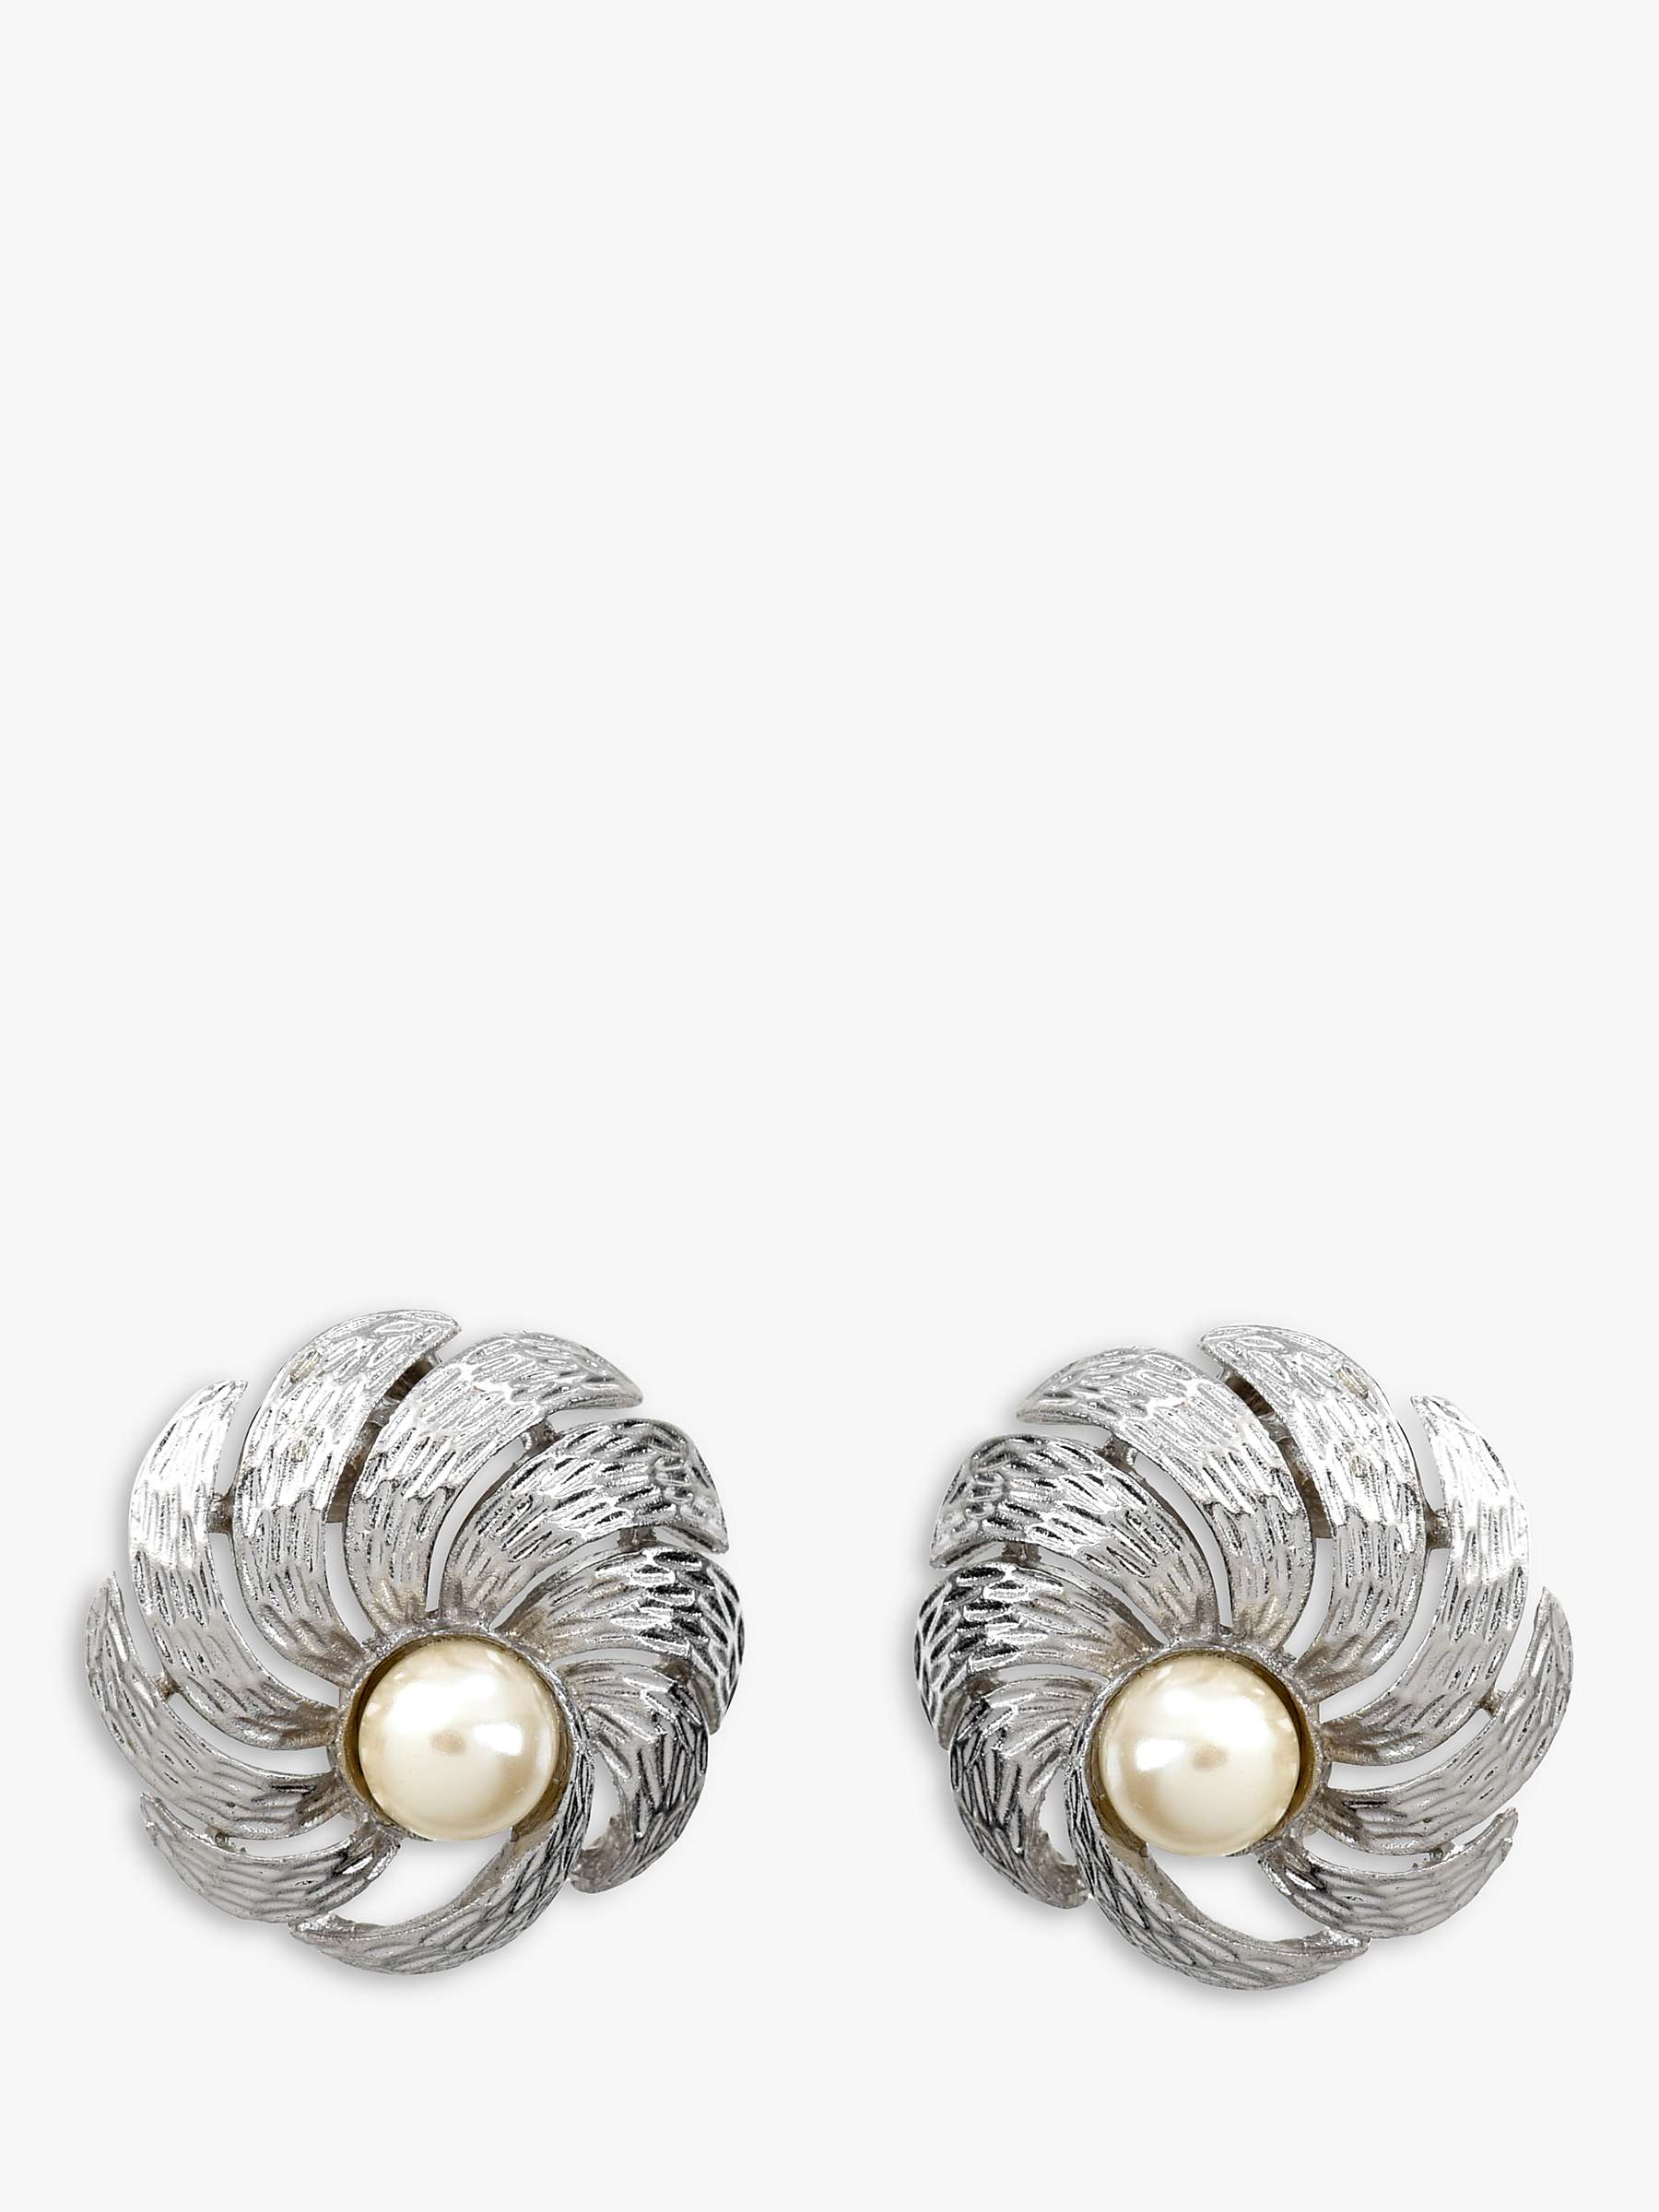 Buy Eclectica Vintage Faux Pearl Textured Swirl Clip On Earrings, Silver Online at johnlewis.com